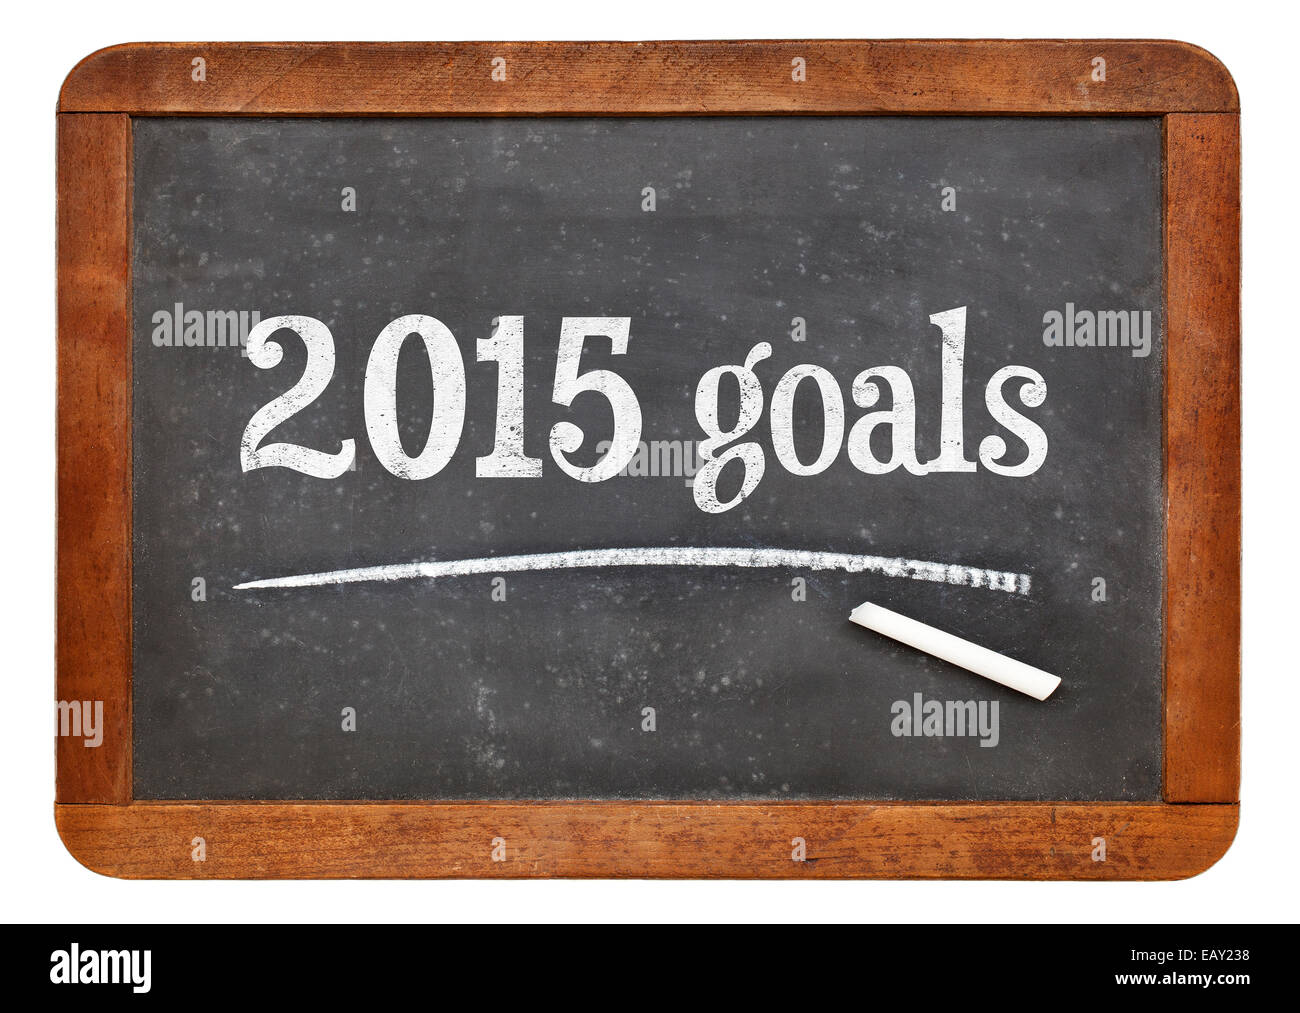 2015 goals on a vintage slate blackboard - New Year plans or resolutions concept Stock Photo